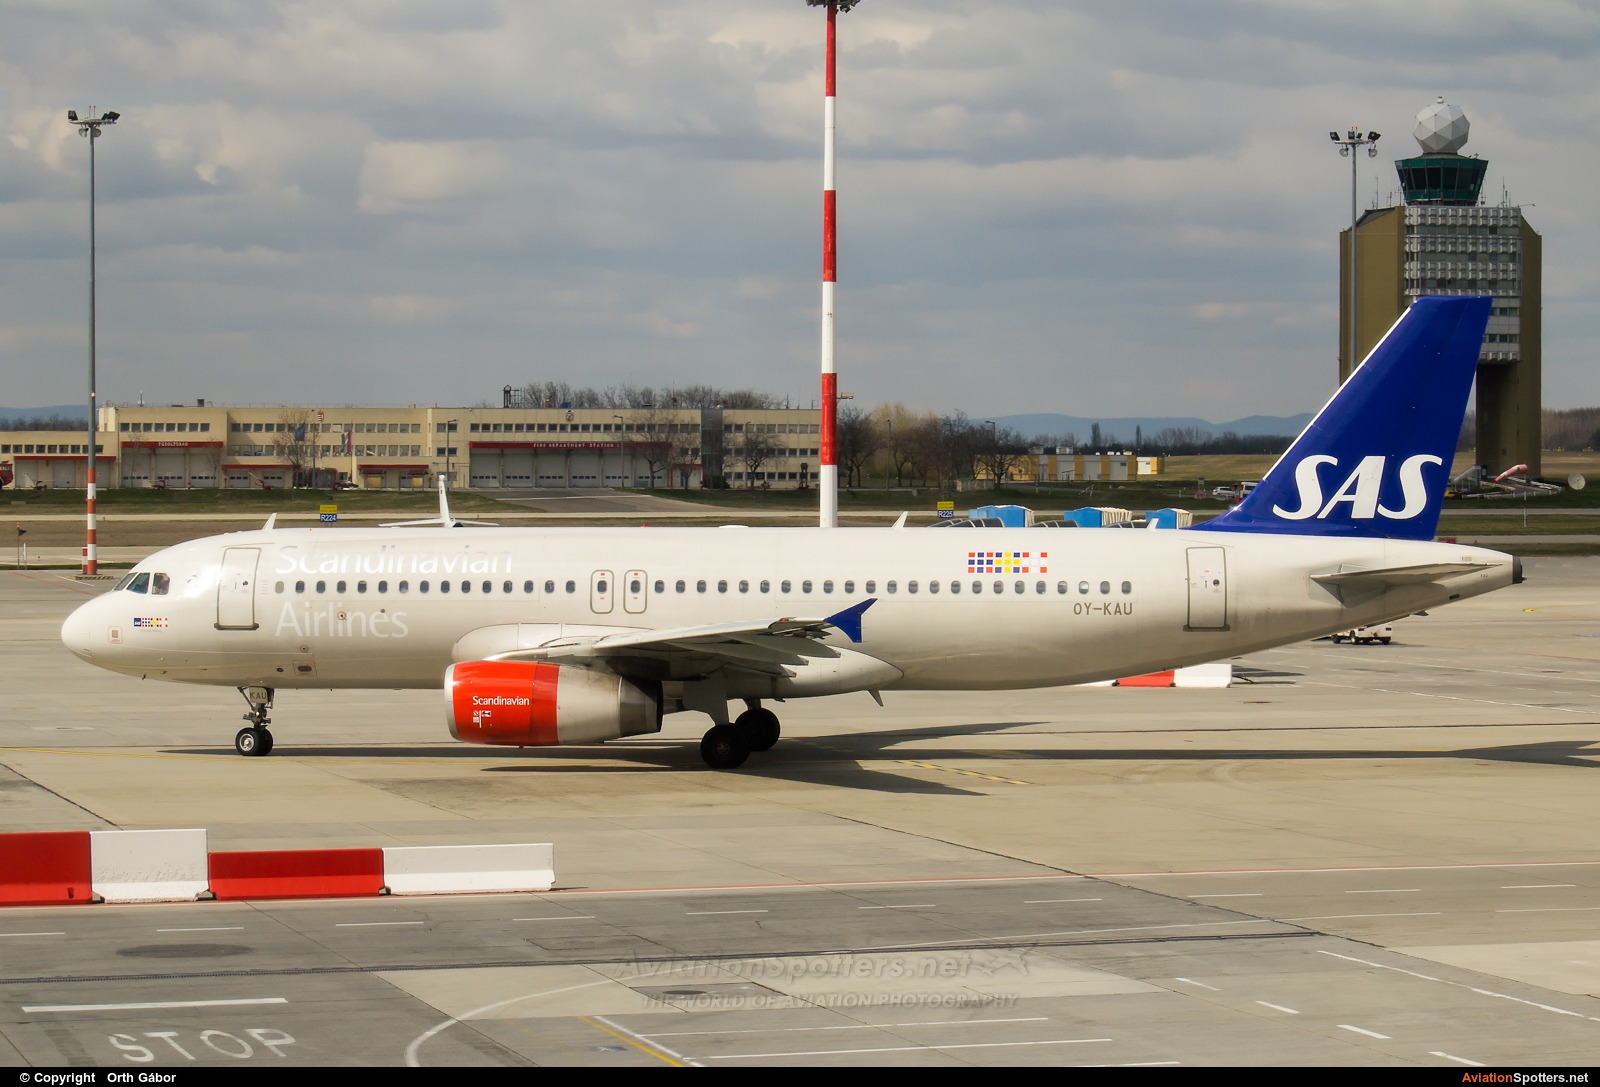 SAS - Scandinavian Airlines  -  A320-232  (OY-KAU) By Orth Gábor (Roodkop)